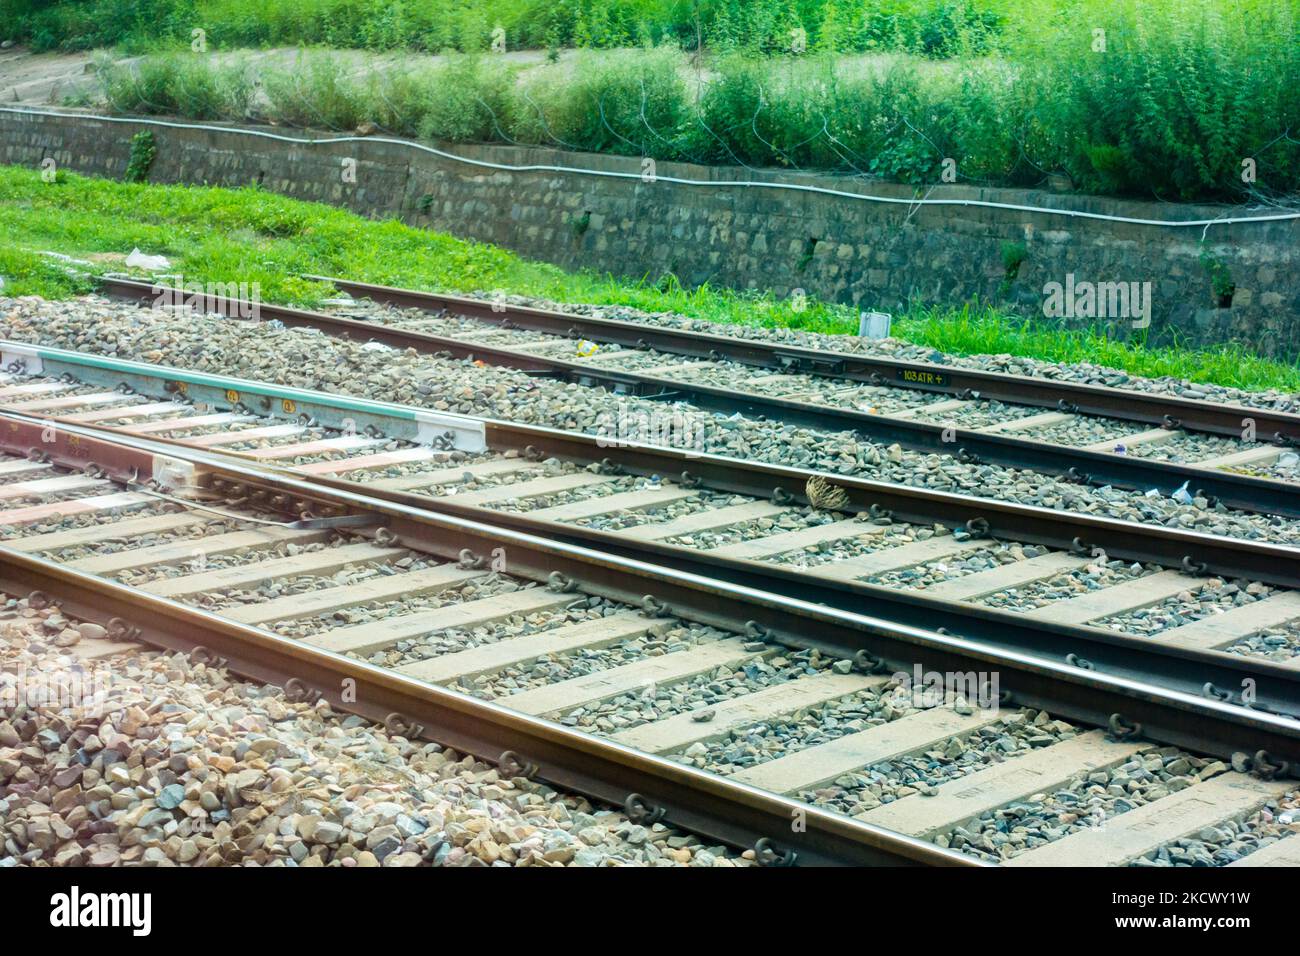 A railroad switch ( AE ) or turnout points on the tracks. Northern Indian Railways. India. Stock Photo